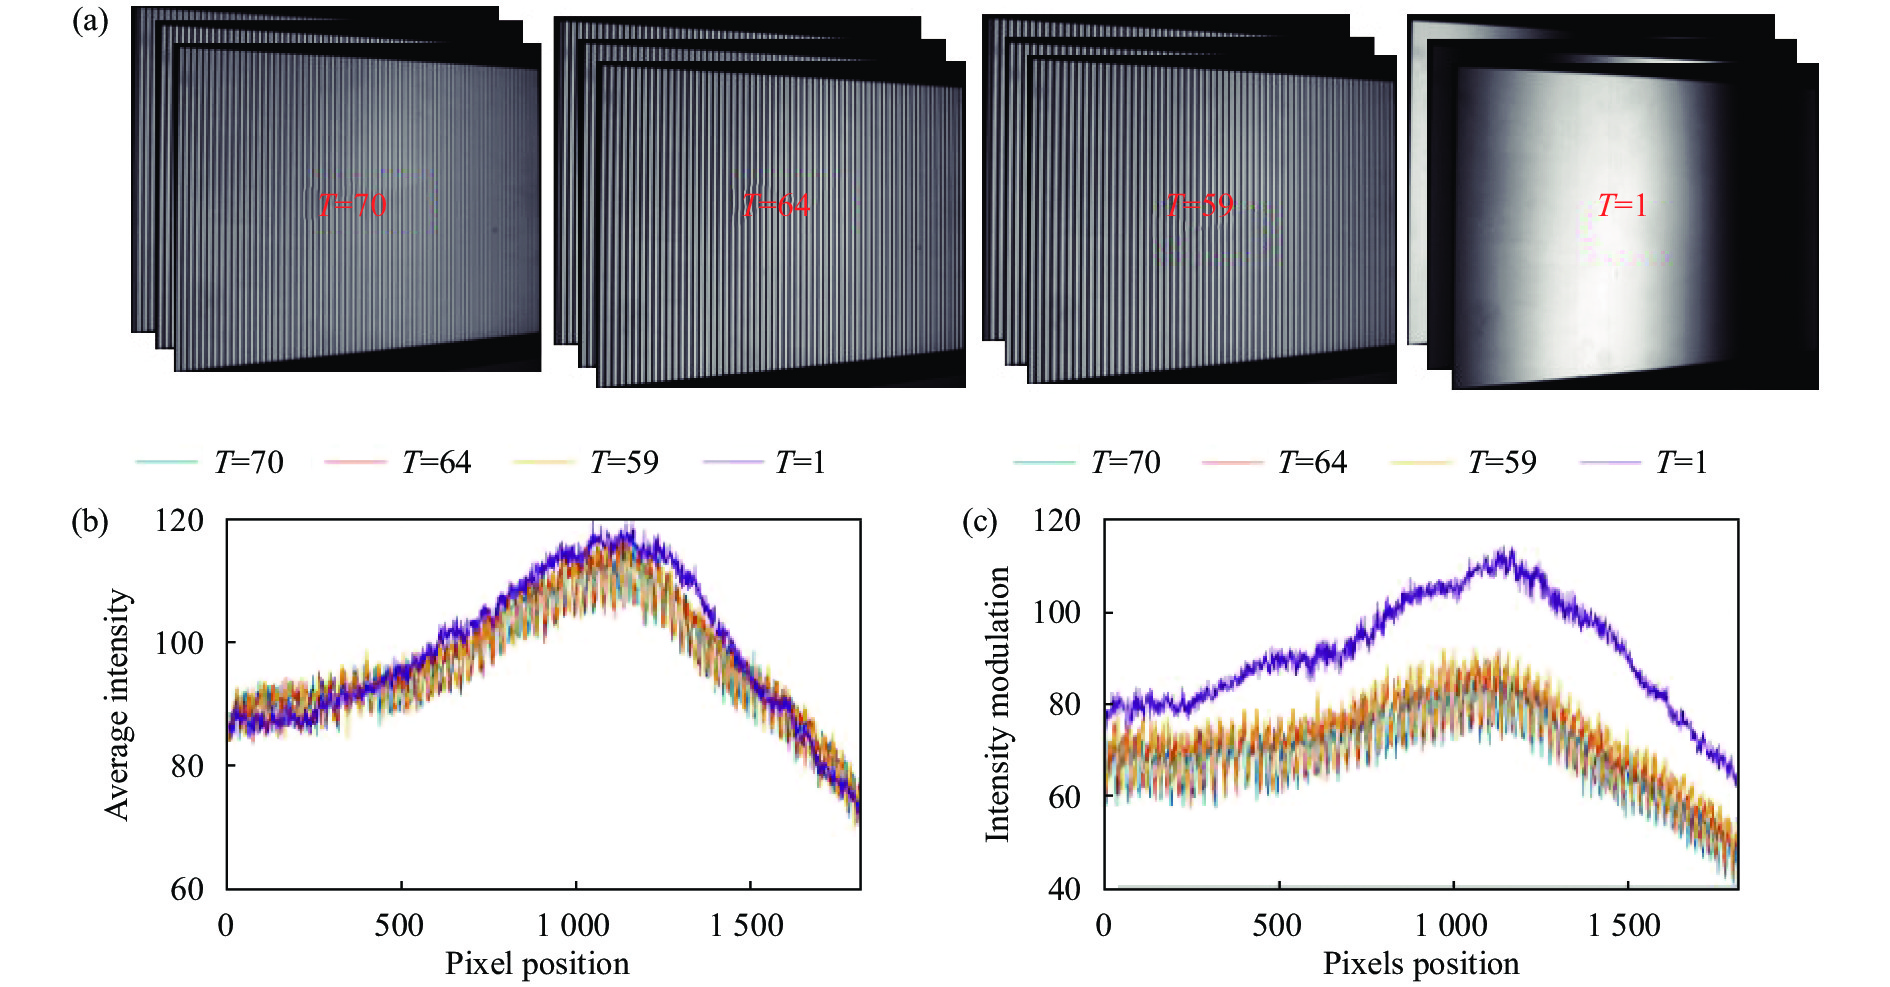 Light intensity experiment of sinusoidal fringe patterns with fringe periods of 70, 64, 59, 1. (a) Three-step phase-shifting patterns obtained from the experiment; (b) Average intensity obtained from the experiment; (c) Intensity modulation obtained from the experiment